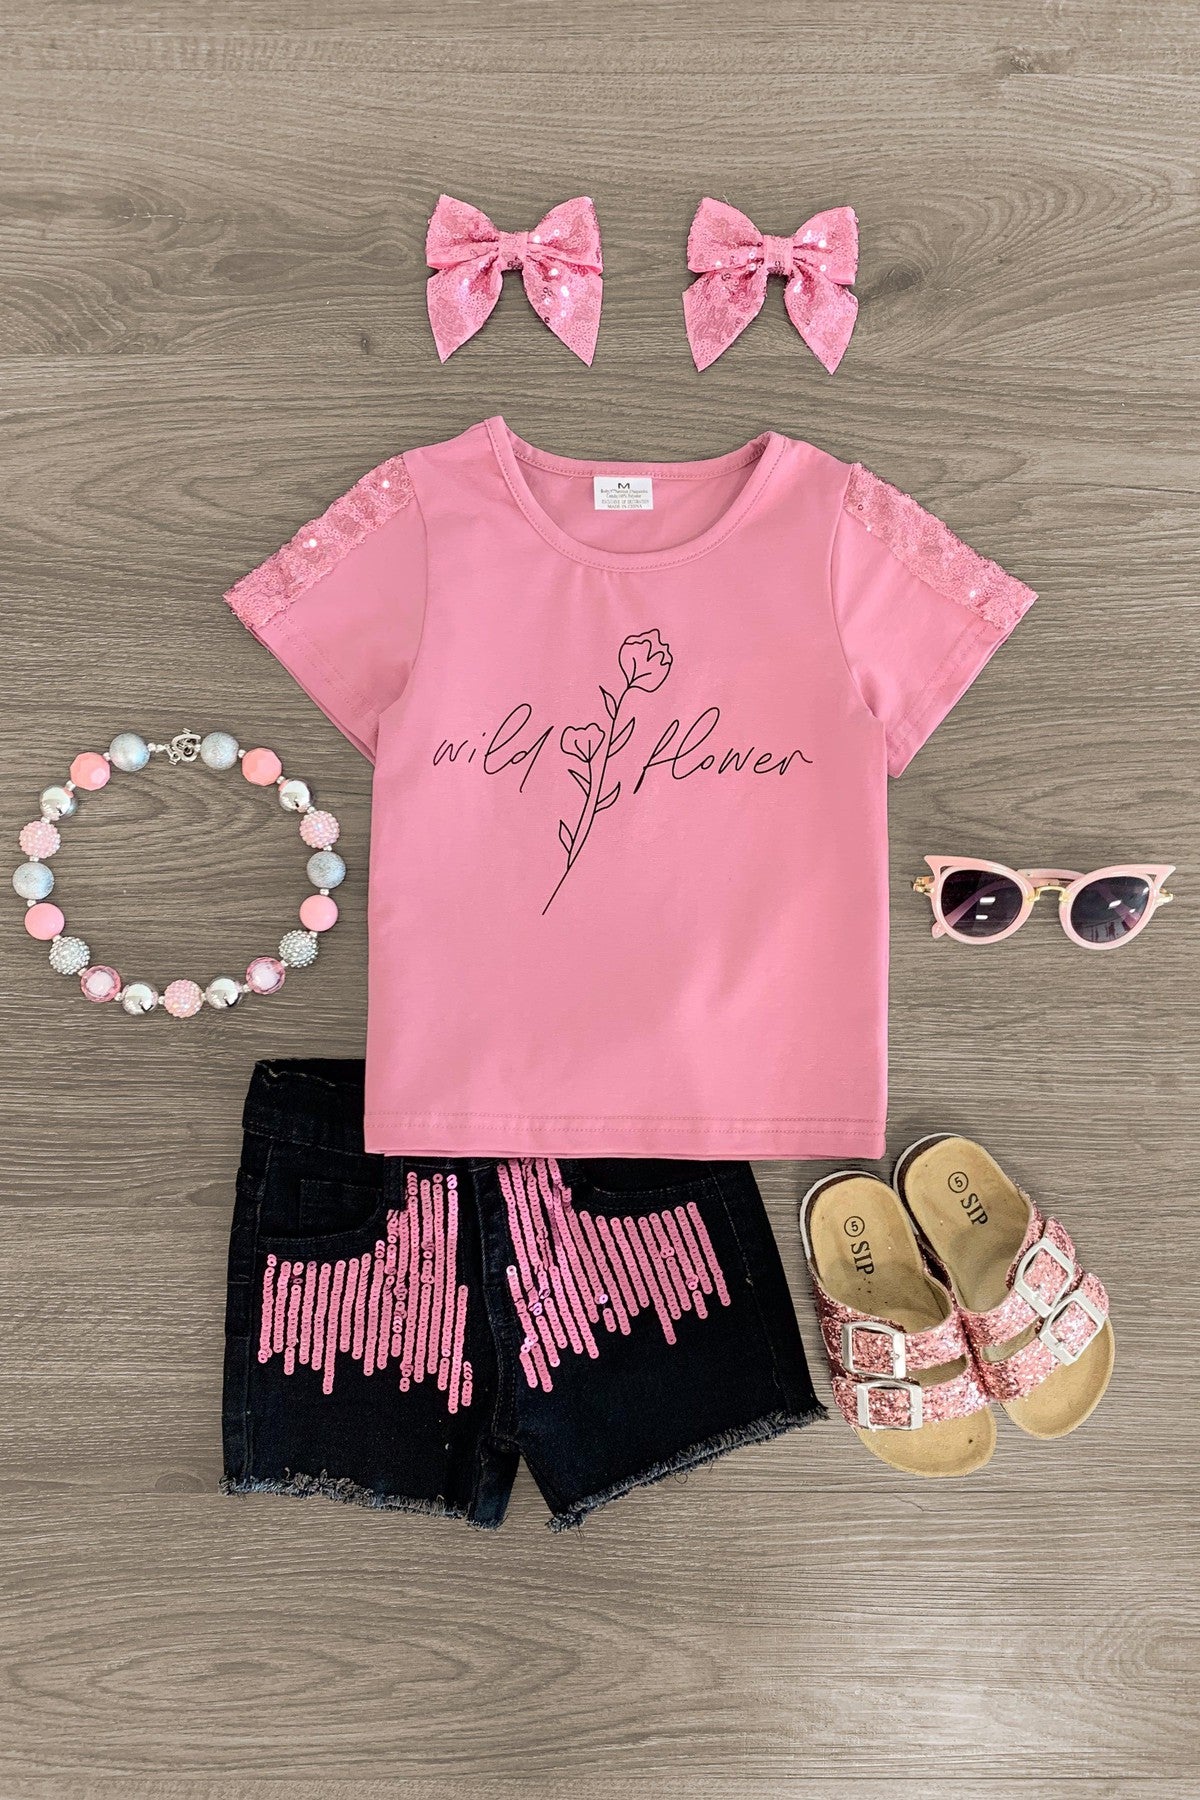 Kids Boutique Kids Clothing : Unique Outfits for Girls : Sparkle in Pink